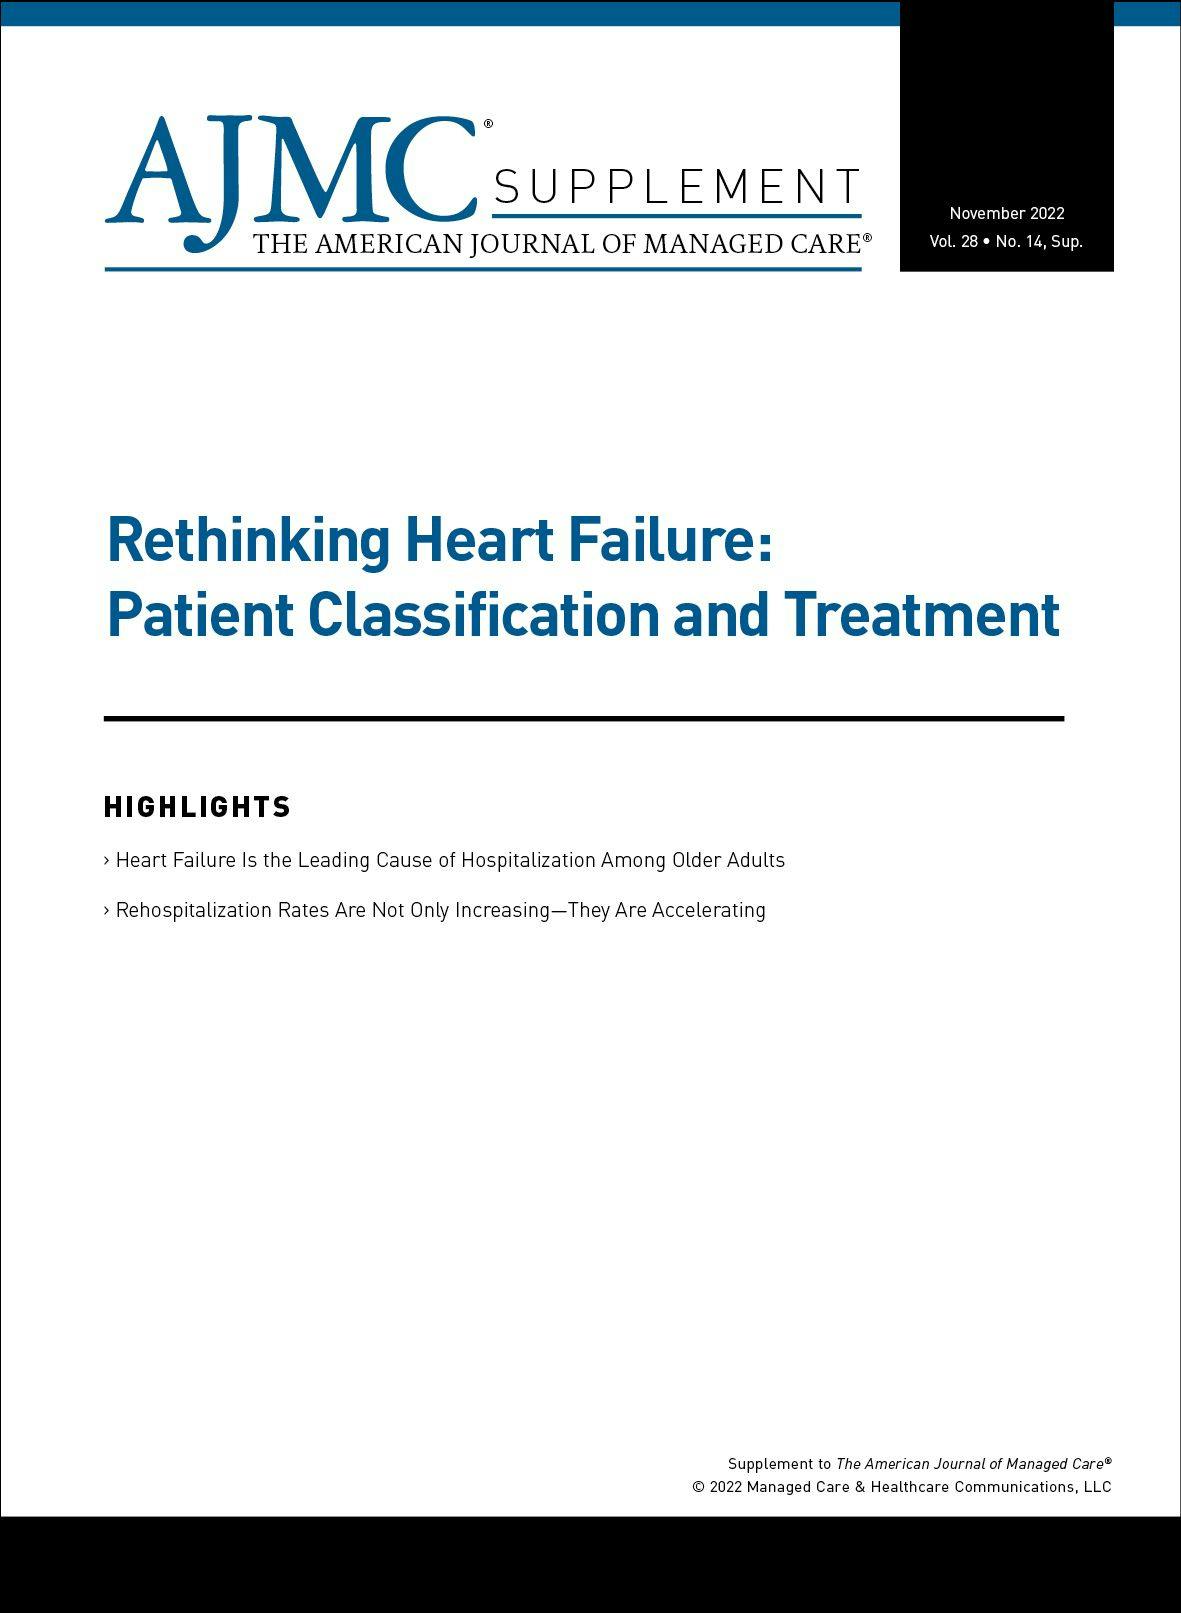 Rethinking Heart Failure: Patient Classification and Treatment